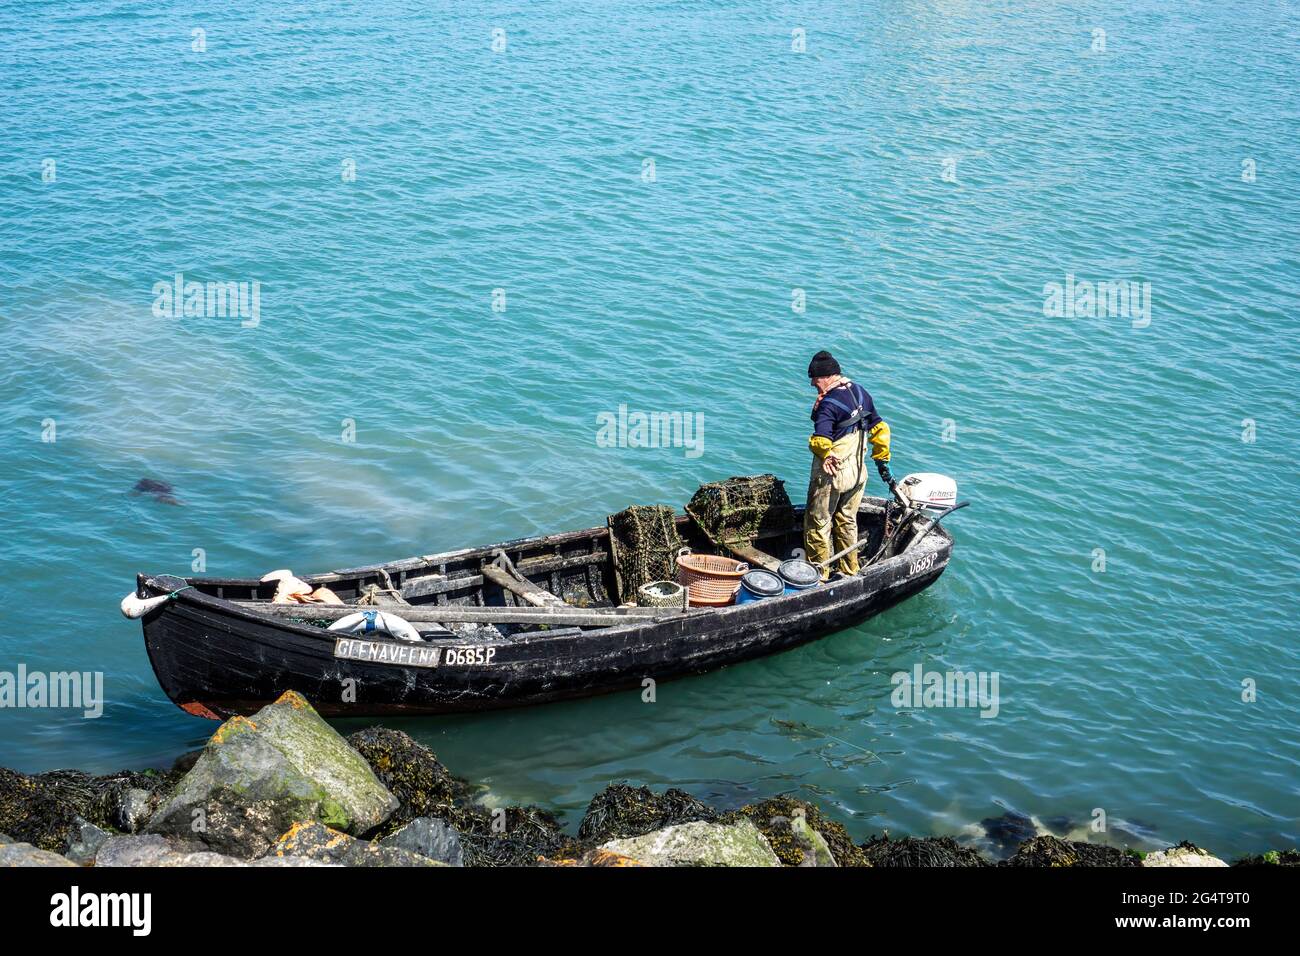 A lobster fisherman at work in a small boat in Howth Harbour in Dublin, Ireland. Stock Photo